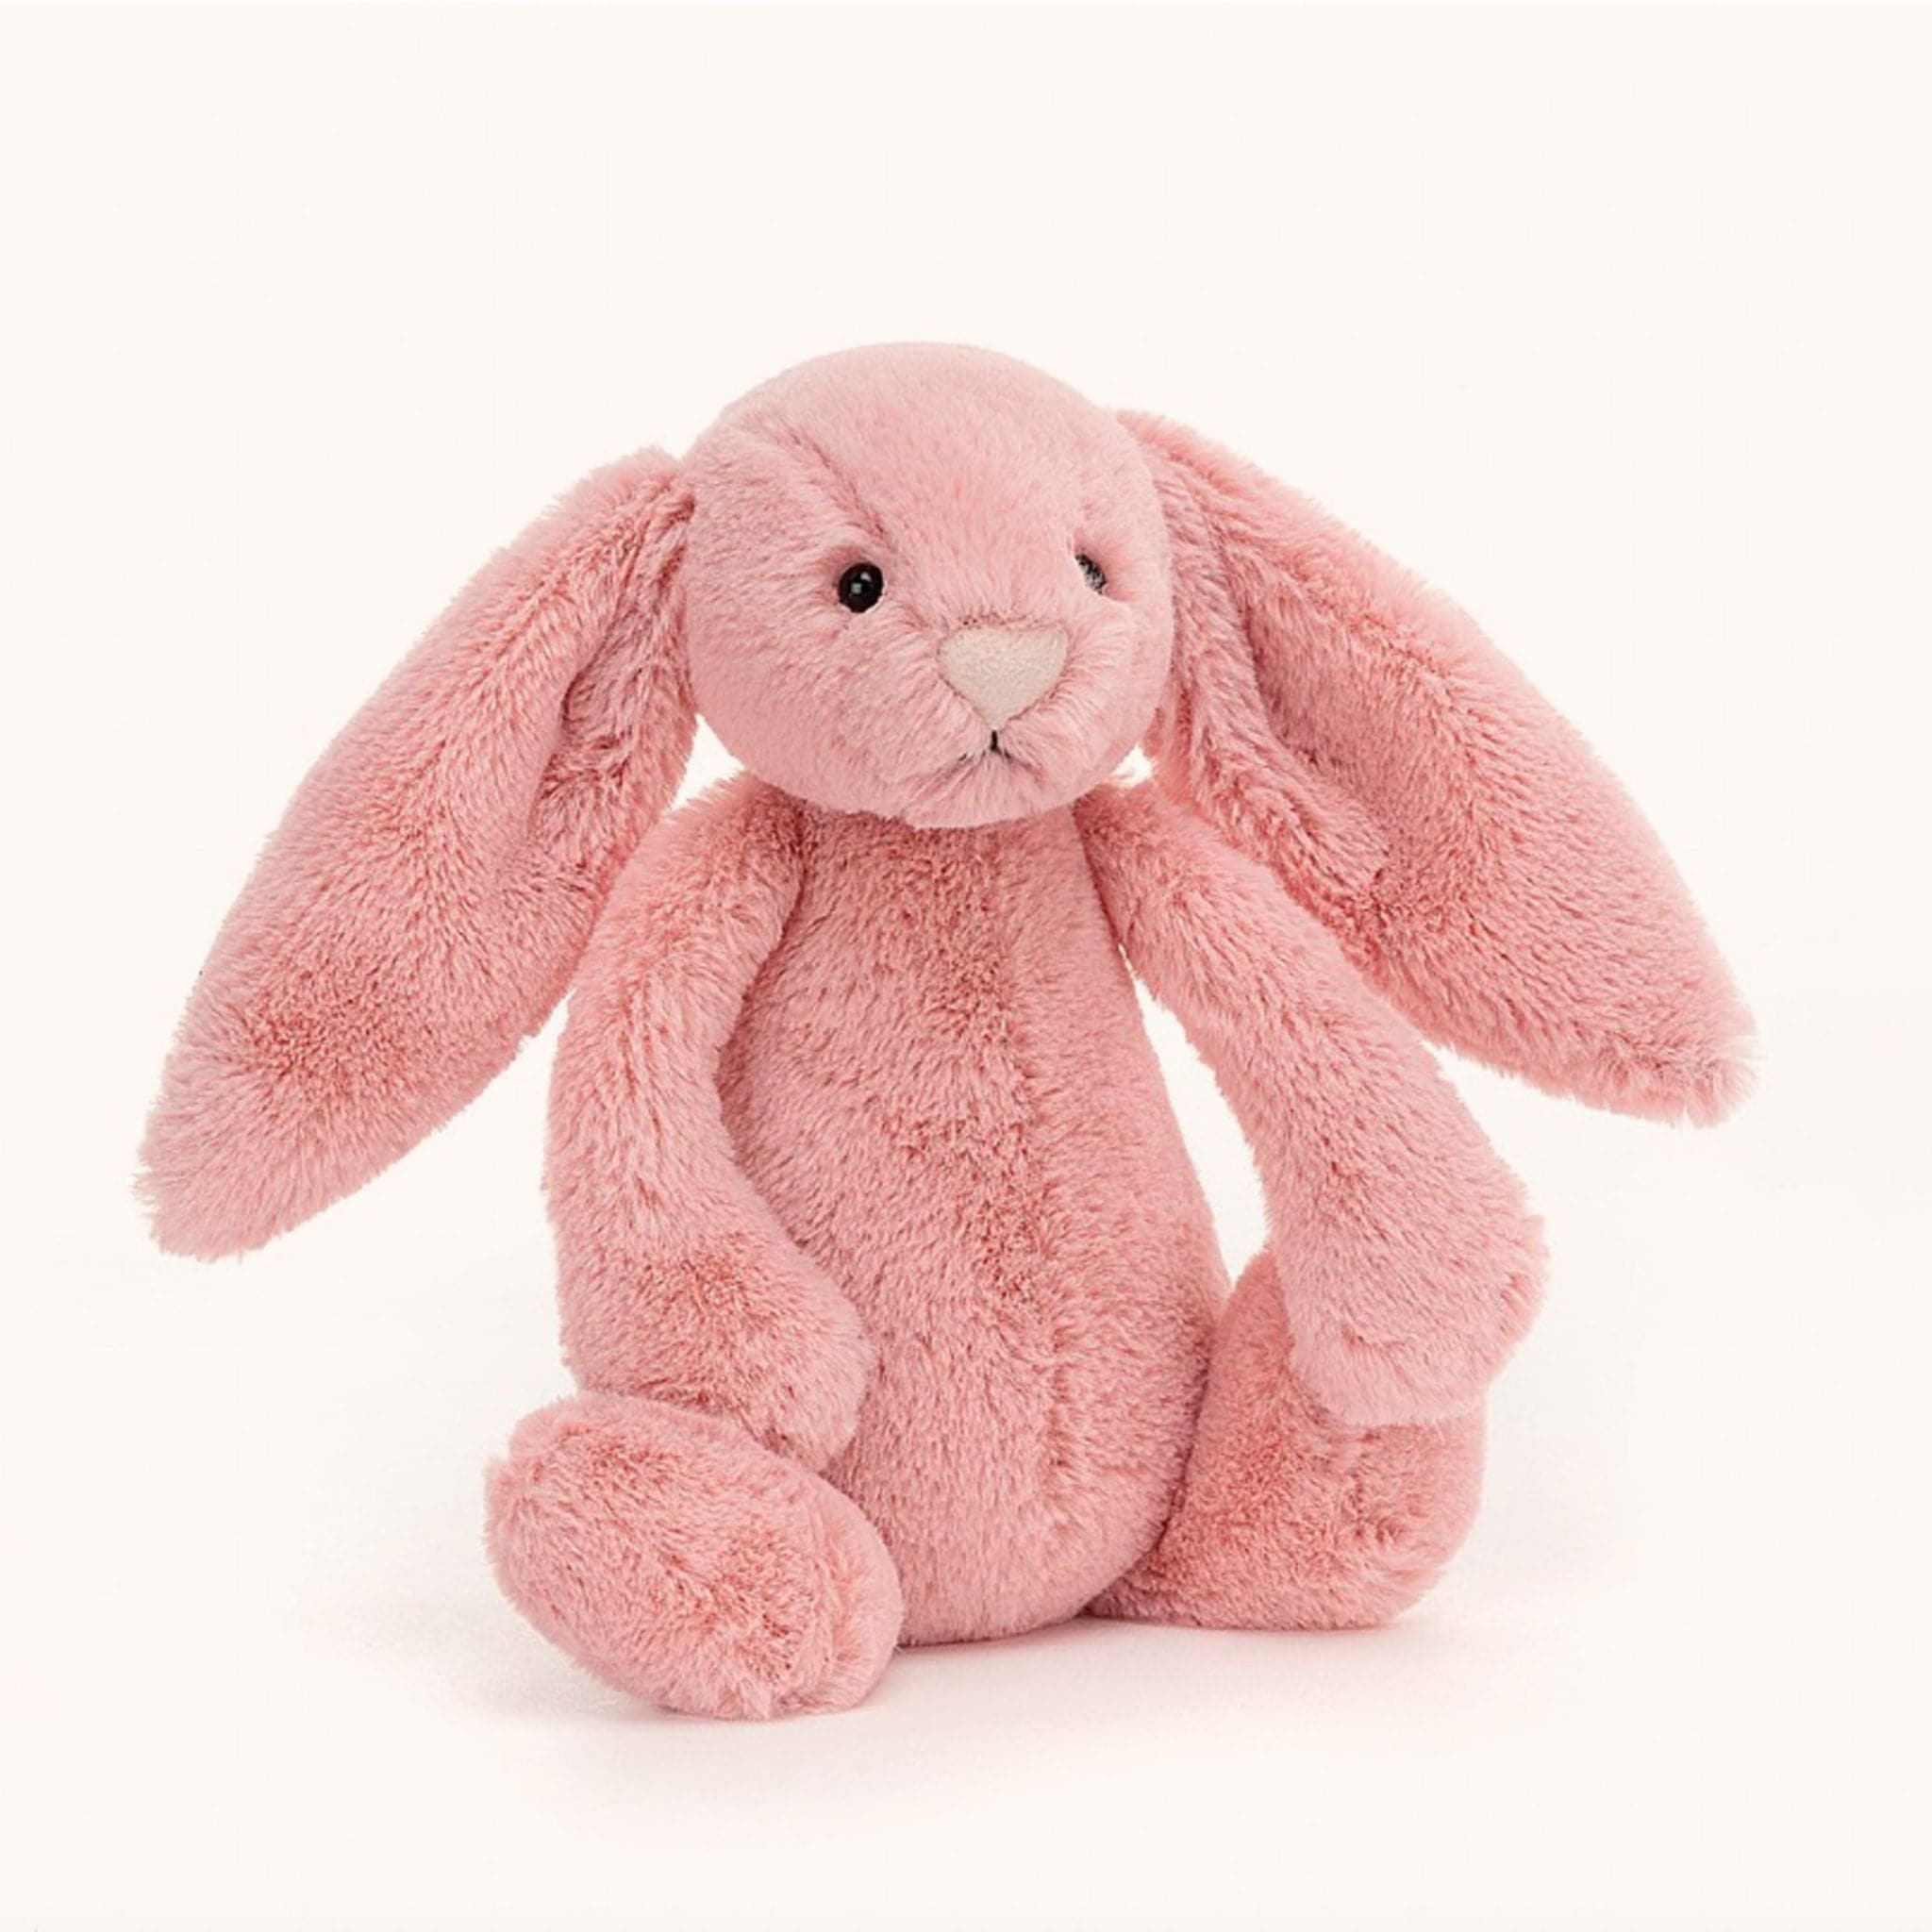 A fuzzy pink bunny stuffed animal with long floppy ears, a light pink nose and black eyes.